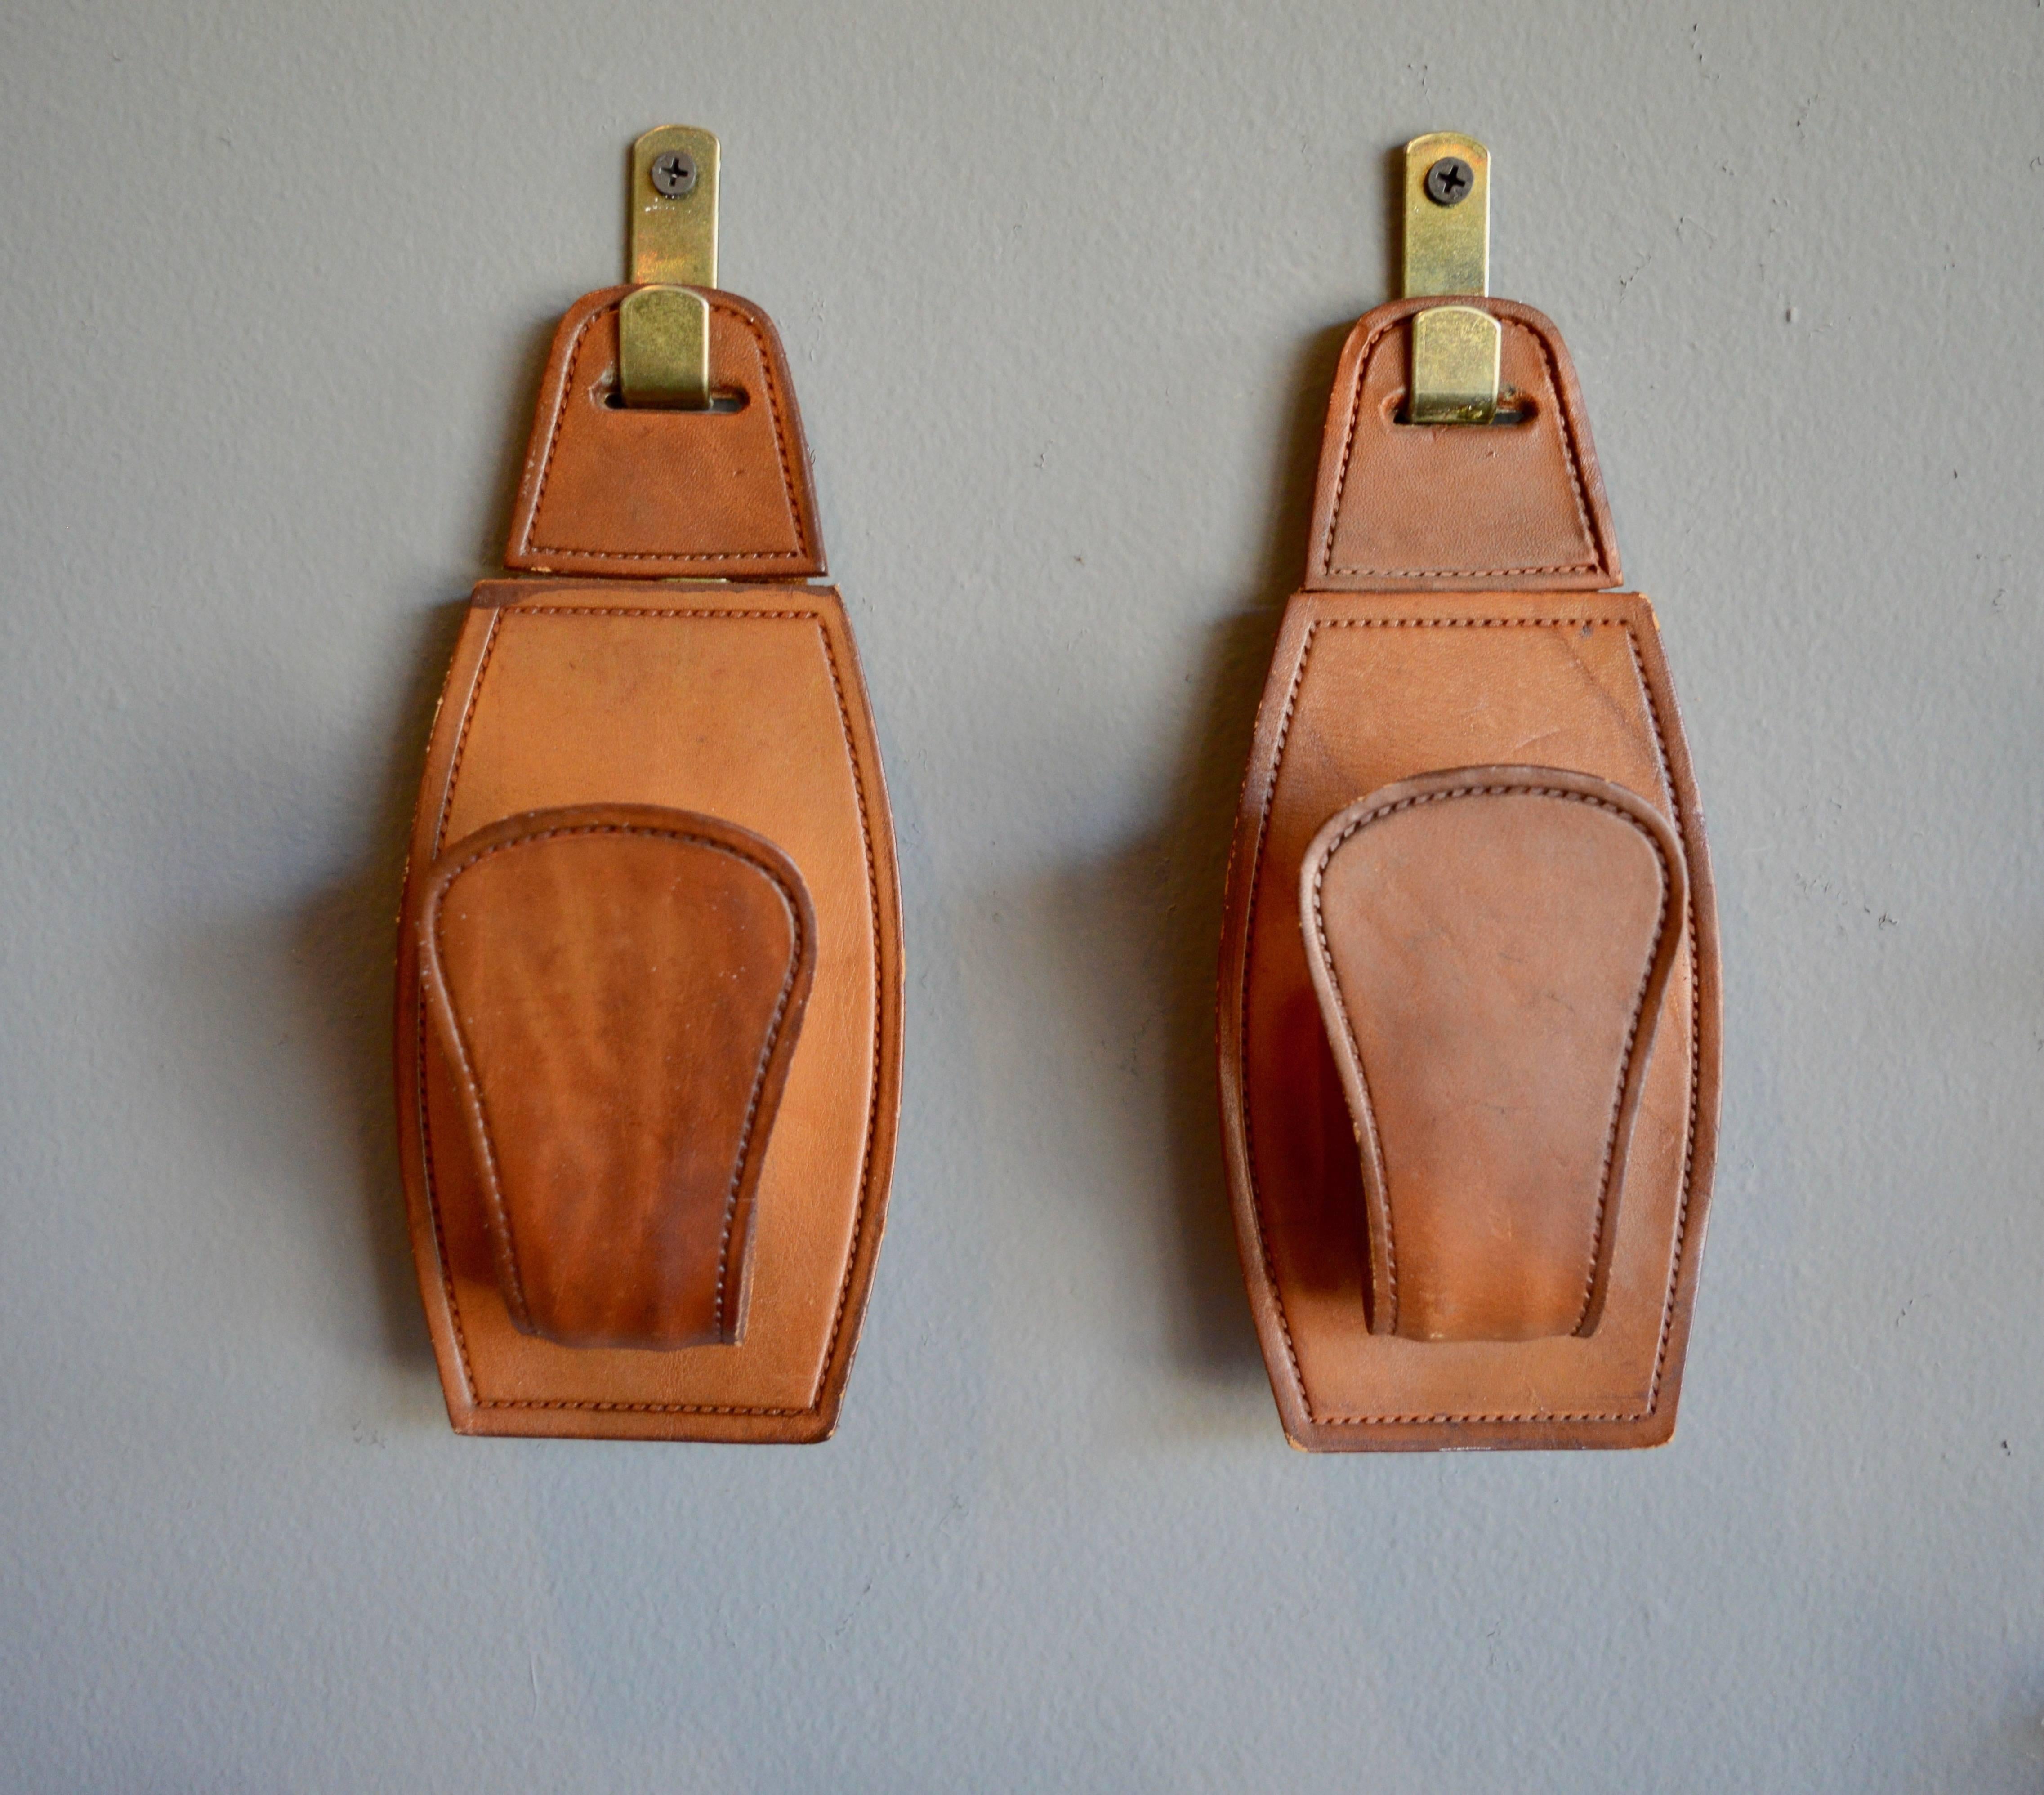 French saddle leather hooks in the style of Jacques Adnet. Beautiful saddle leather with rich patina. Hooks have brass clips to hang them. Clips can be removed and hooks can be hung with a center screw. Three hooks available. Priced individually.